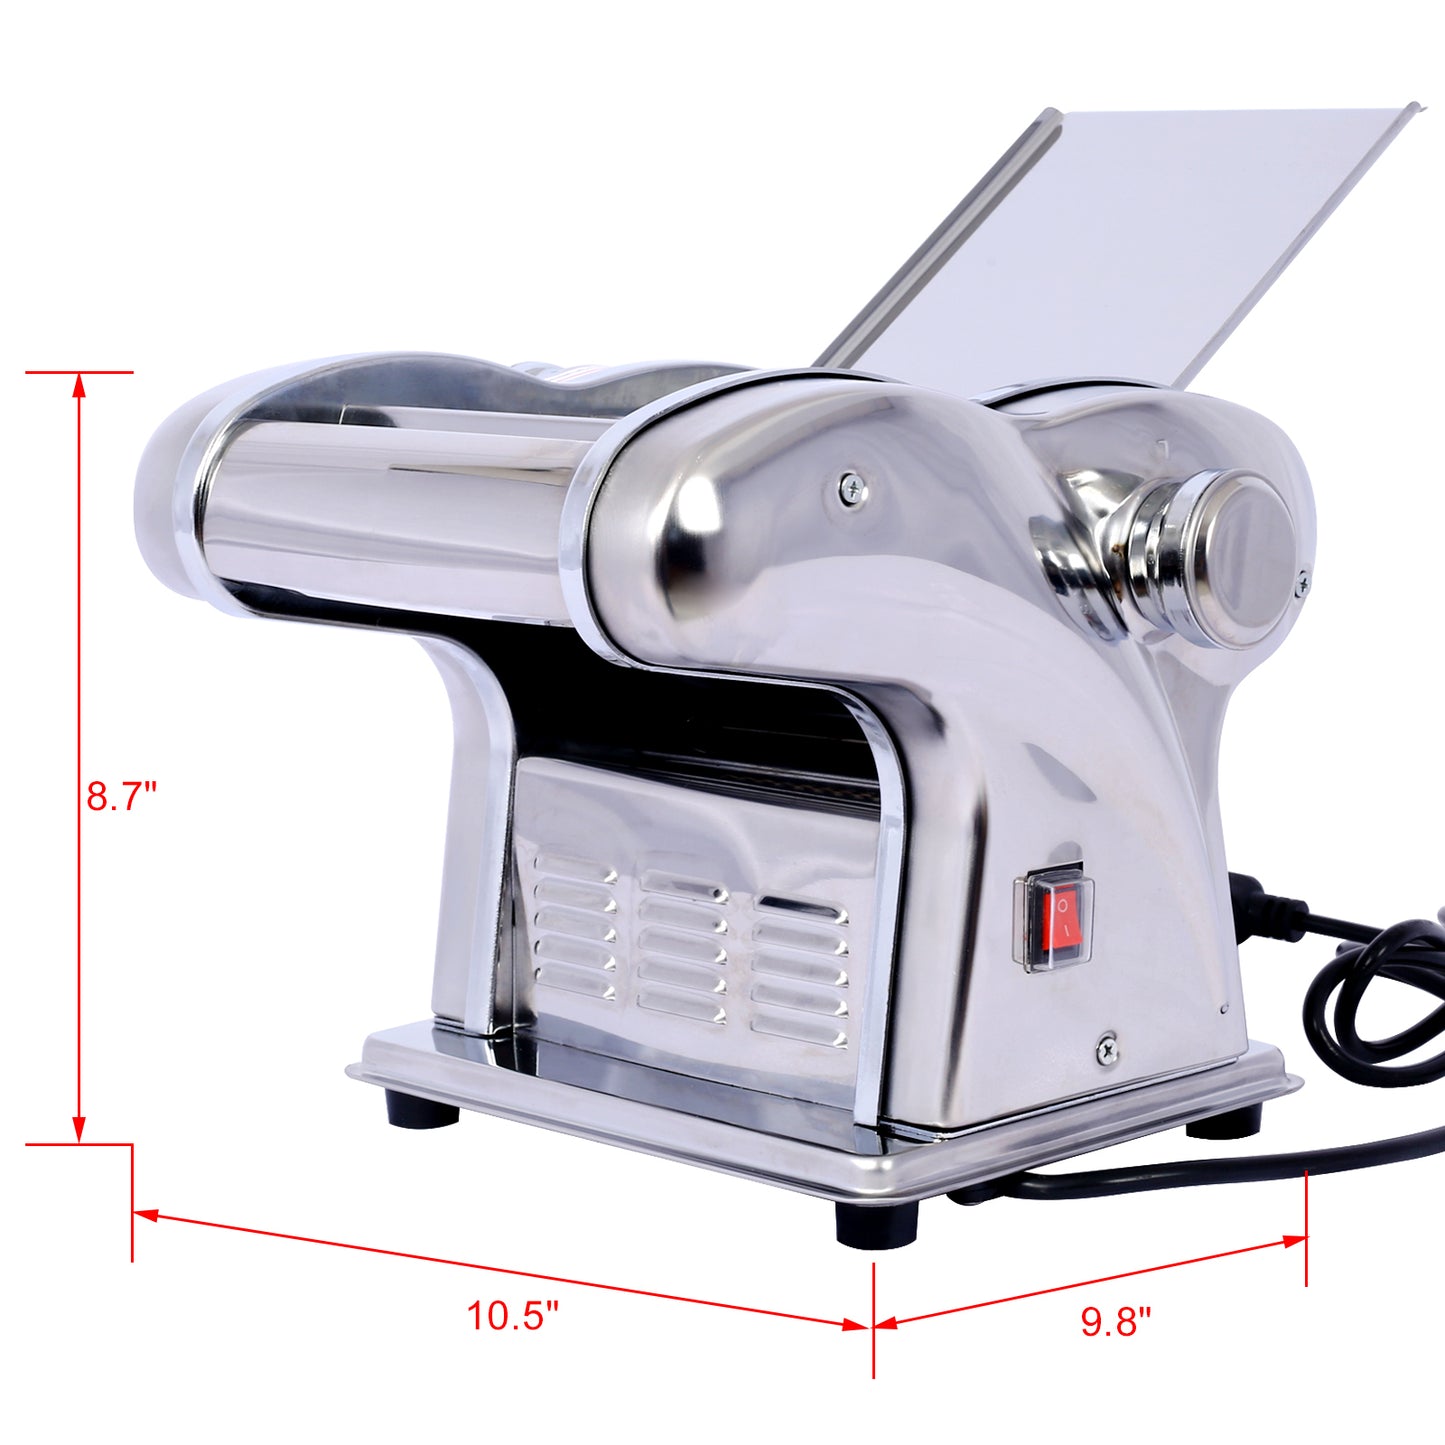 Electric Pasta Maker Noodle Maker Pasta Making Machine Dough Roller Cutter Thickness Adjustable Stainless Steel US 110V 135w  3 Blades Type 2.5mm Round+4mm Flat+9mm Wide Noodle